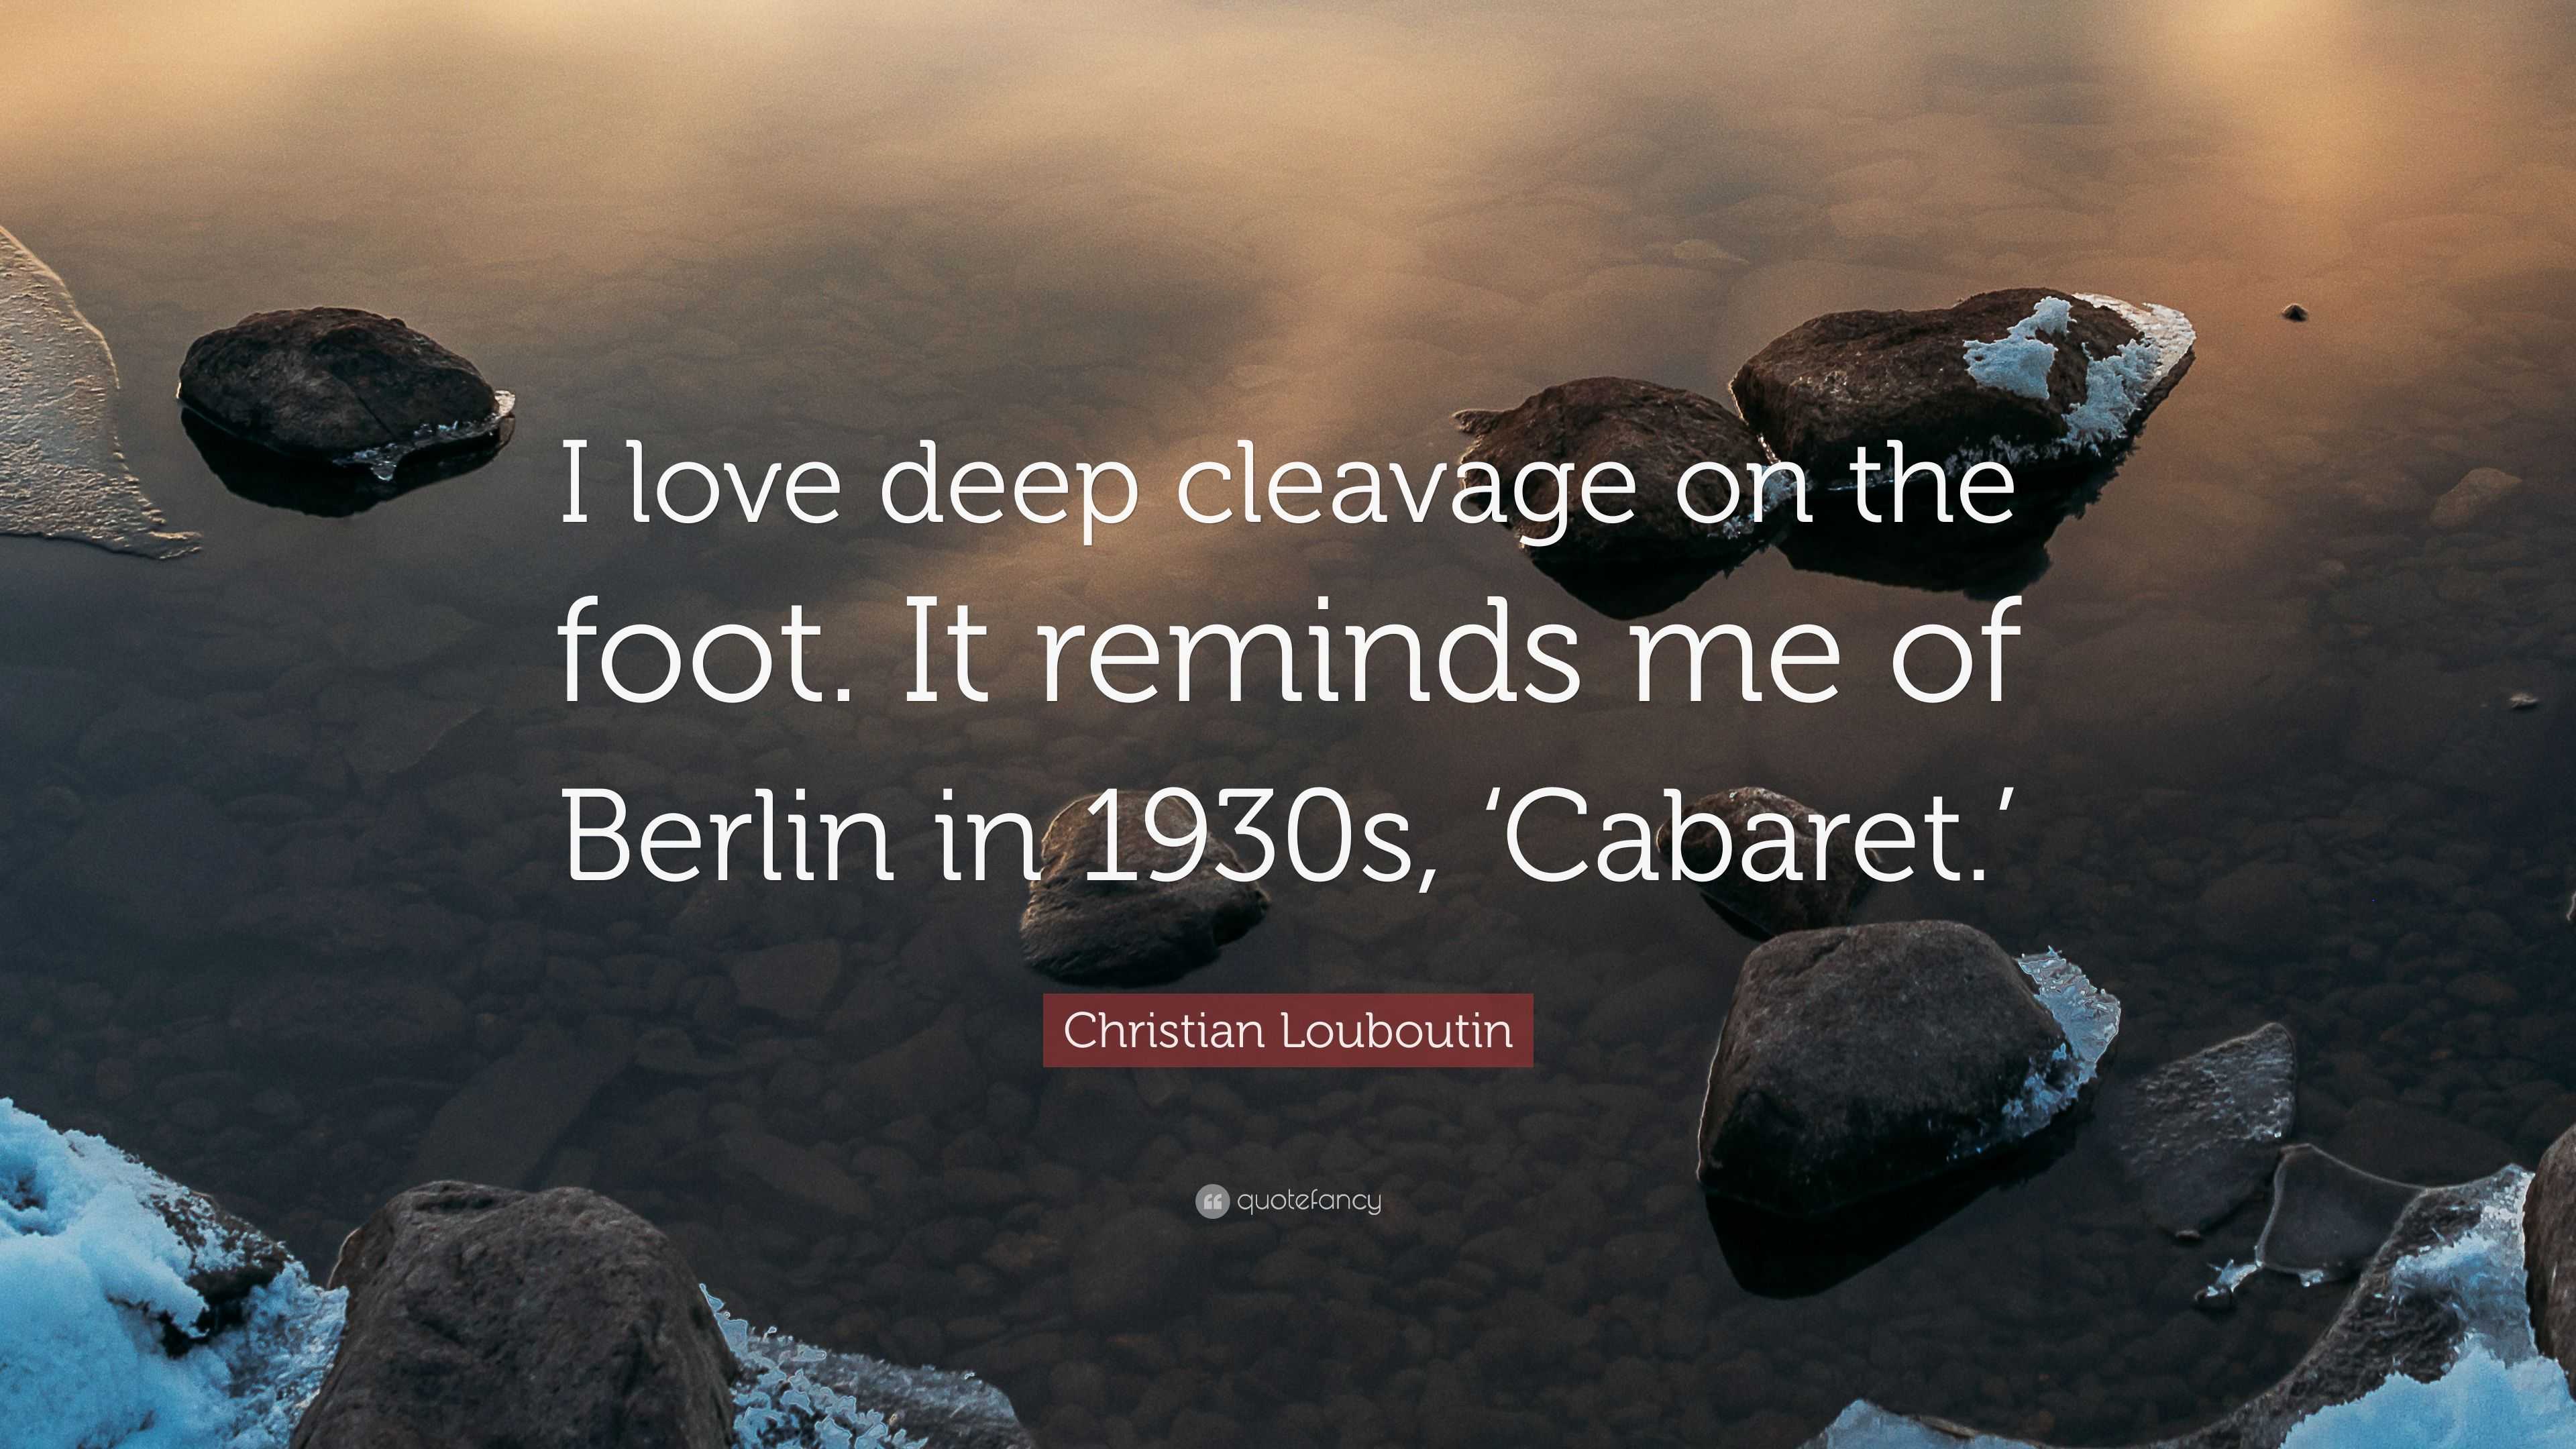 Christian Louboutin Quote: “I love deep cleavage on the foot. It